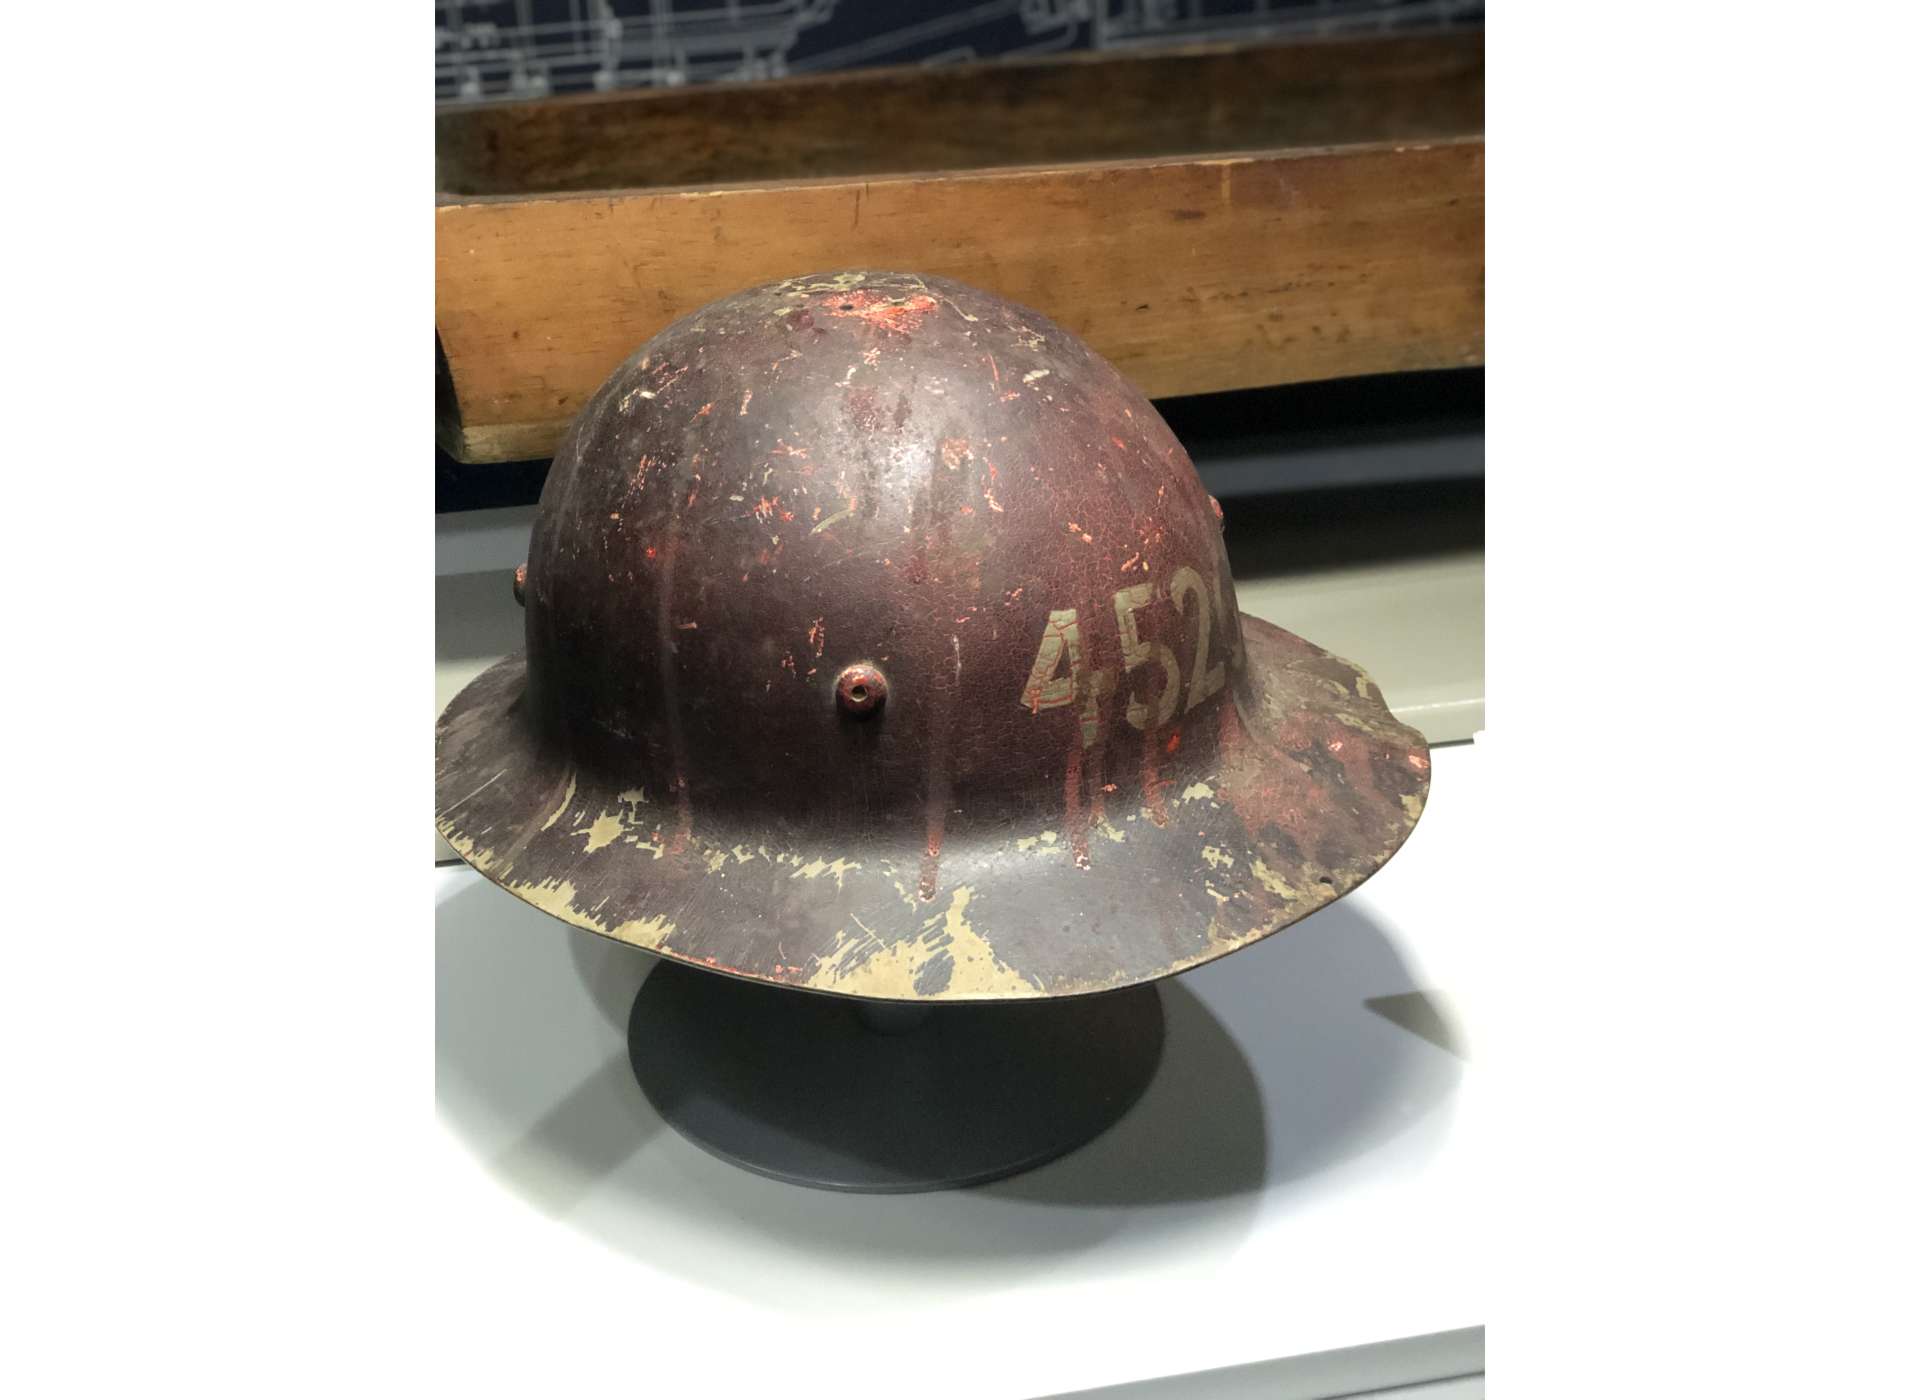 The Higgins Industries hard hat of Joseph R. Poche, who apprenticed in the machine shop at the Higgins City Park plant.